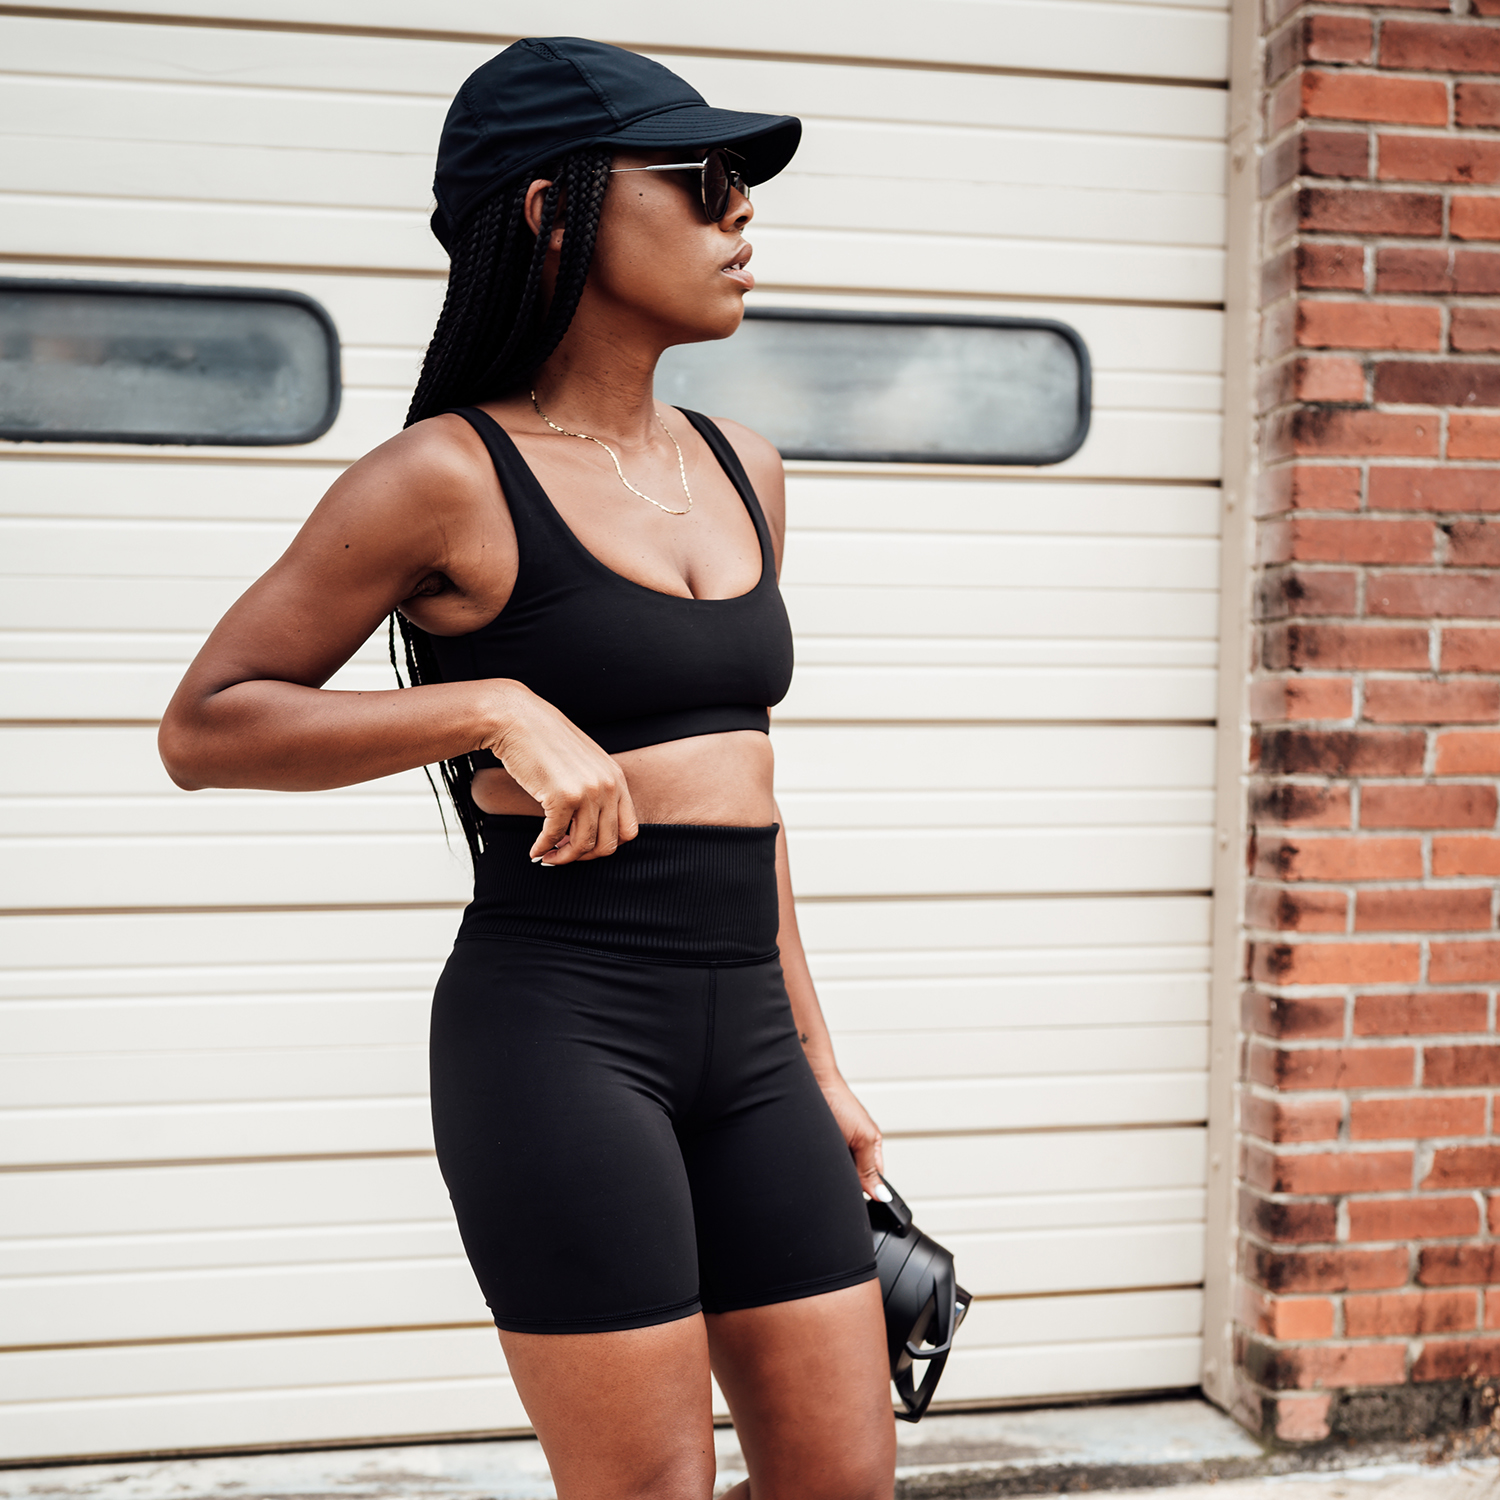 Activewear comparison: Brands (below $50) that are cheaper than